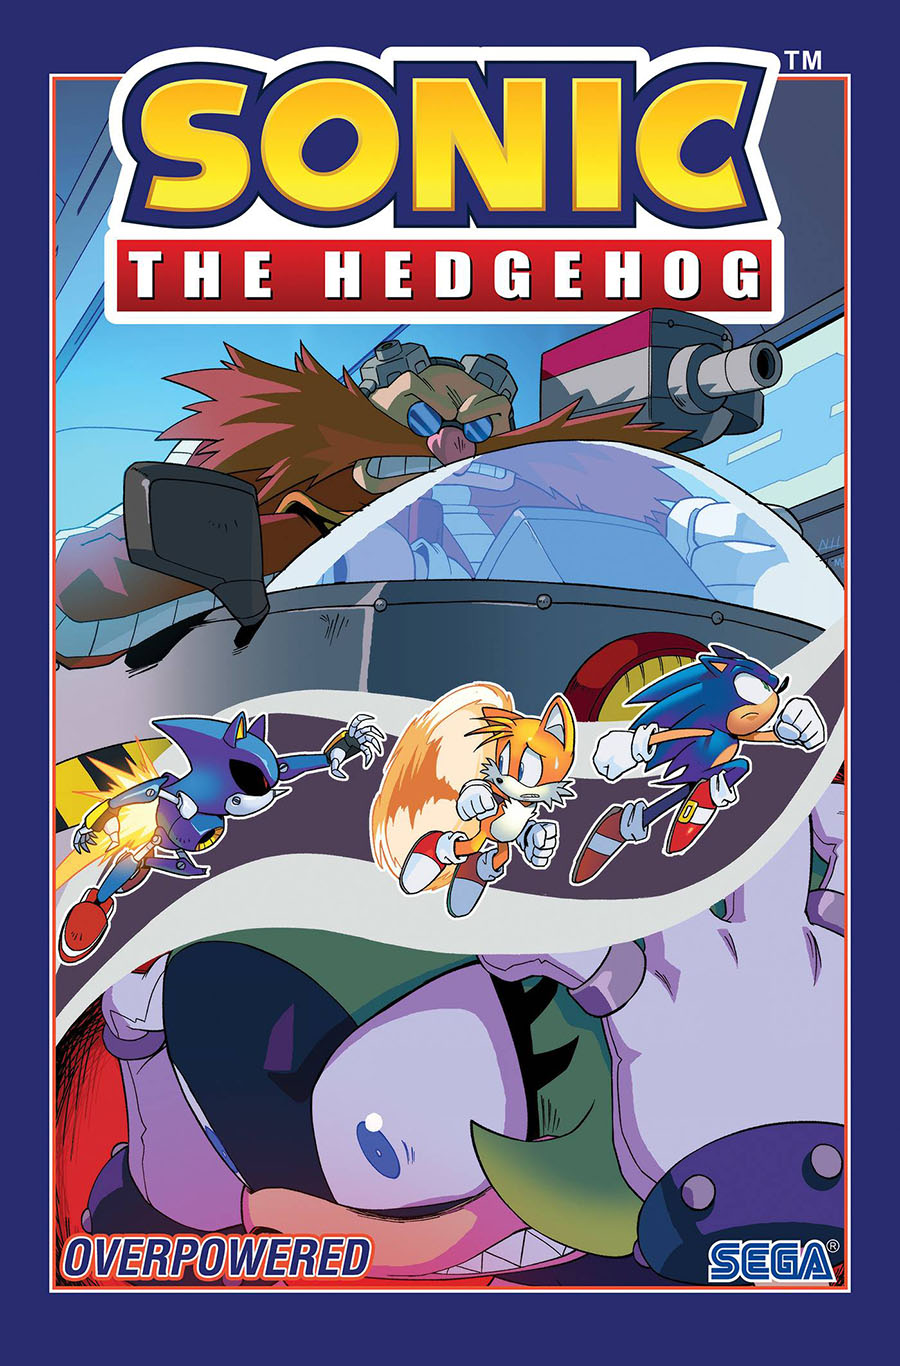 Sonic The Hedgehog (IDW) Vol 14 Overpowered TP